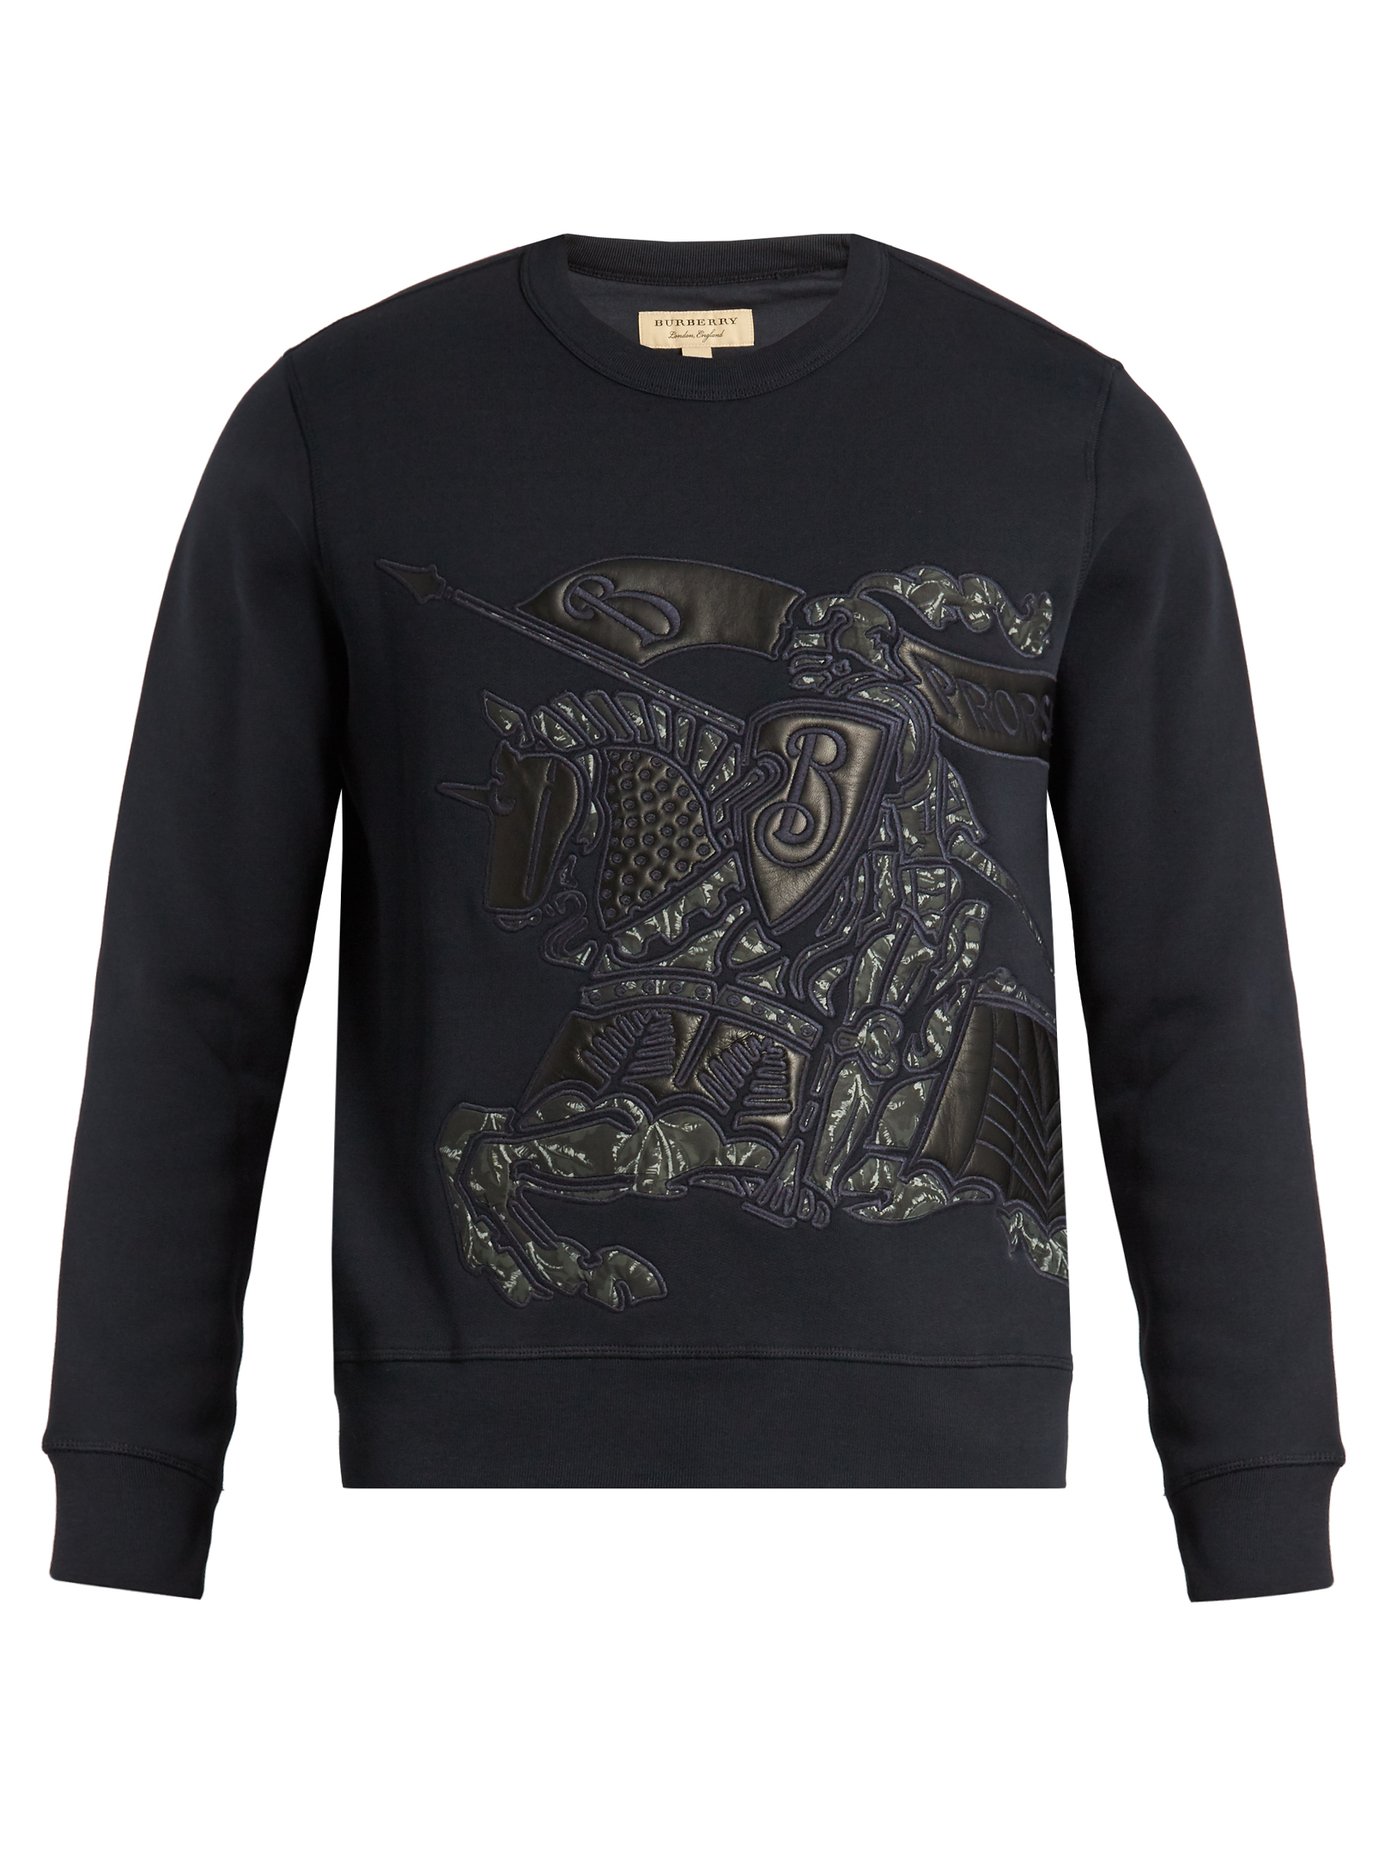 Burberry Equestrian Knight Logo T-Shirt : Remixed classics in a montage ...